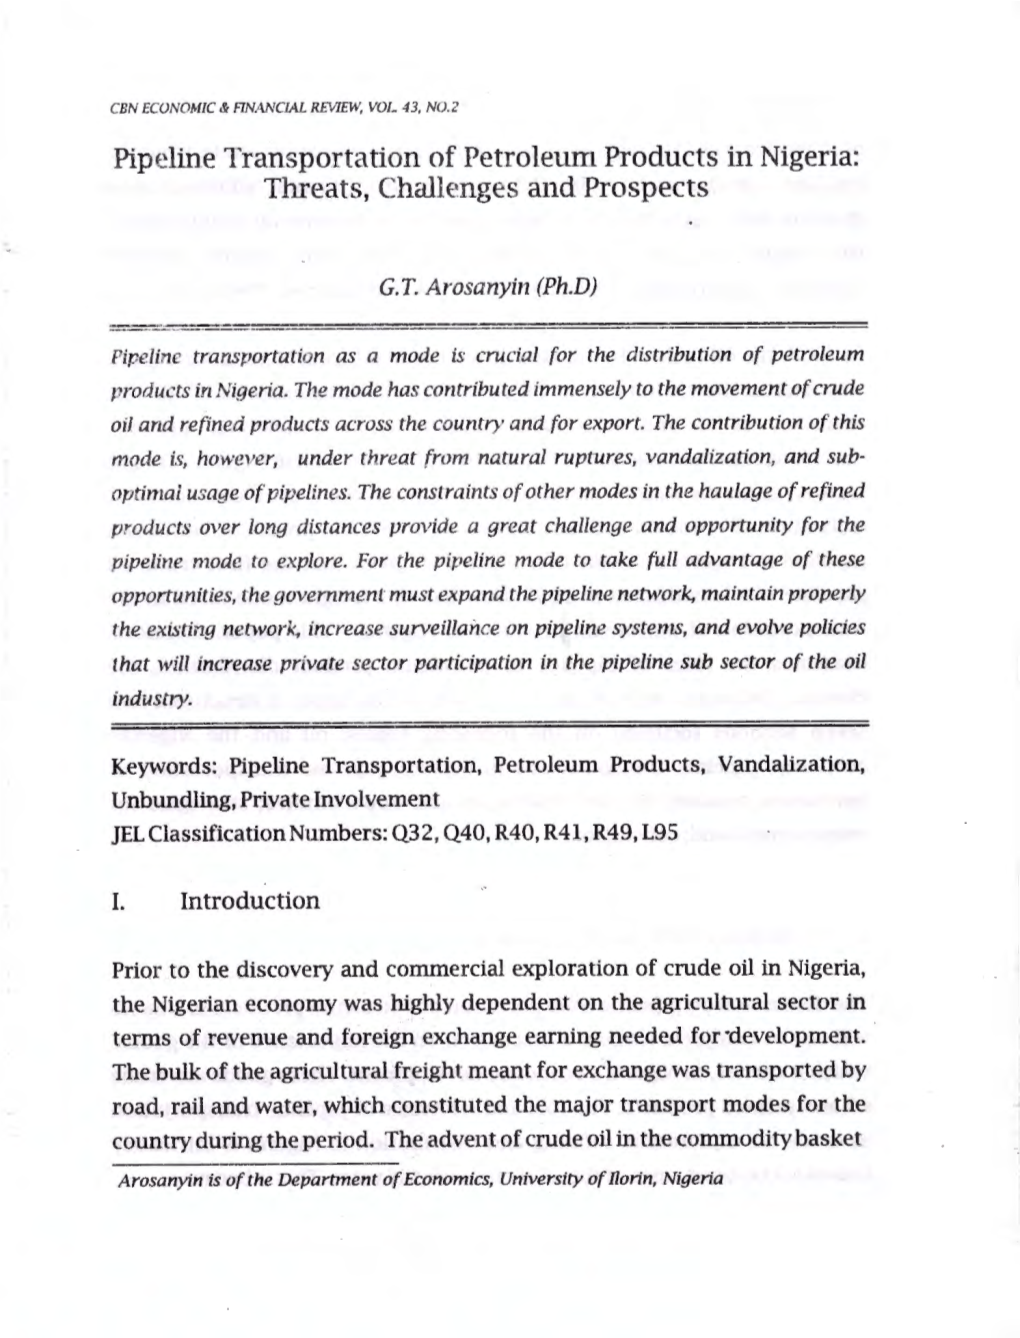 Pipeline Transportation of Petroleum Products in Nigeria: Threats, Challenges and Prospects